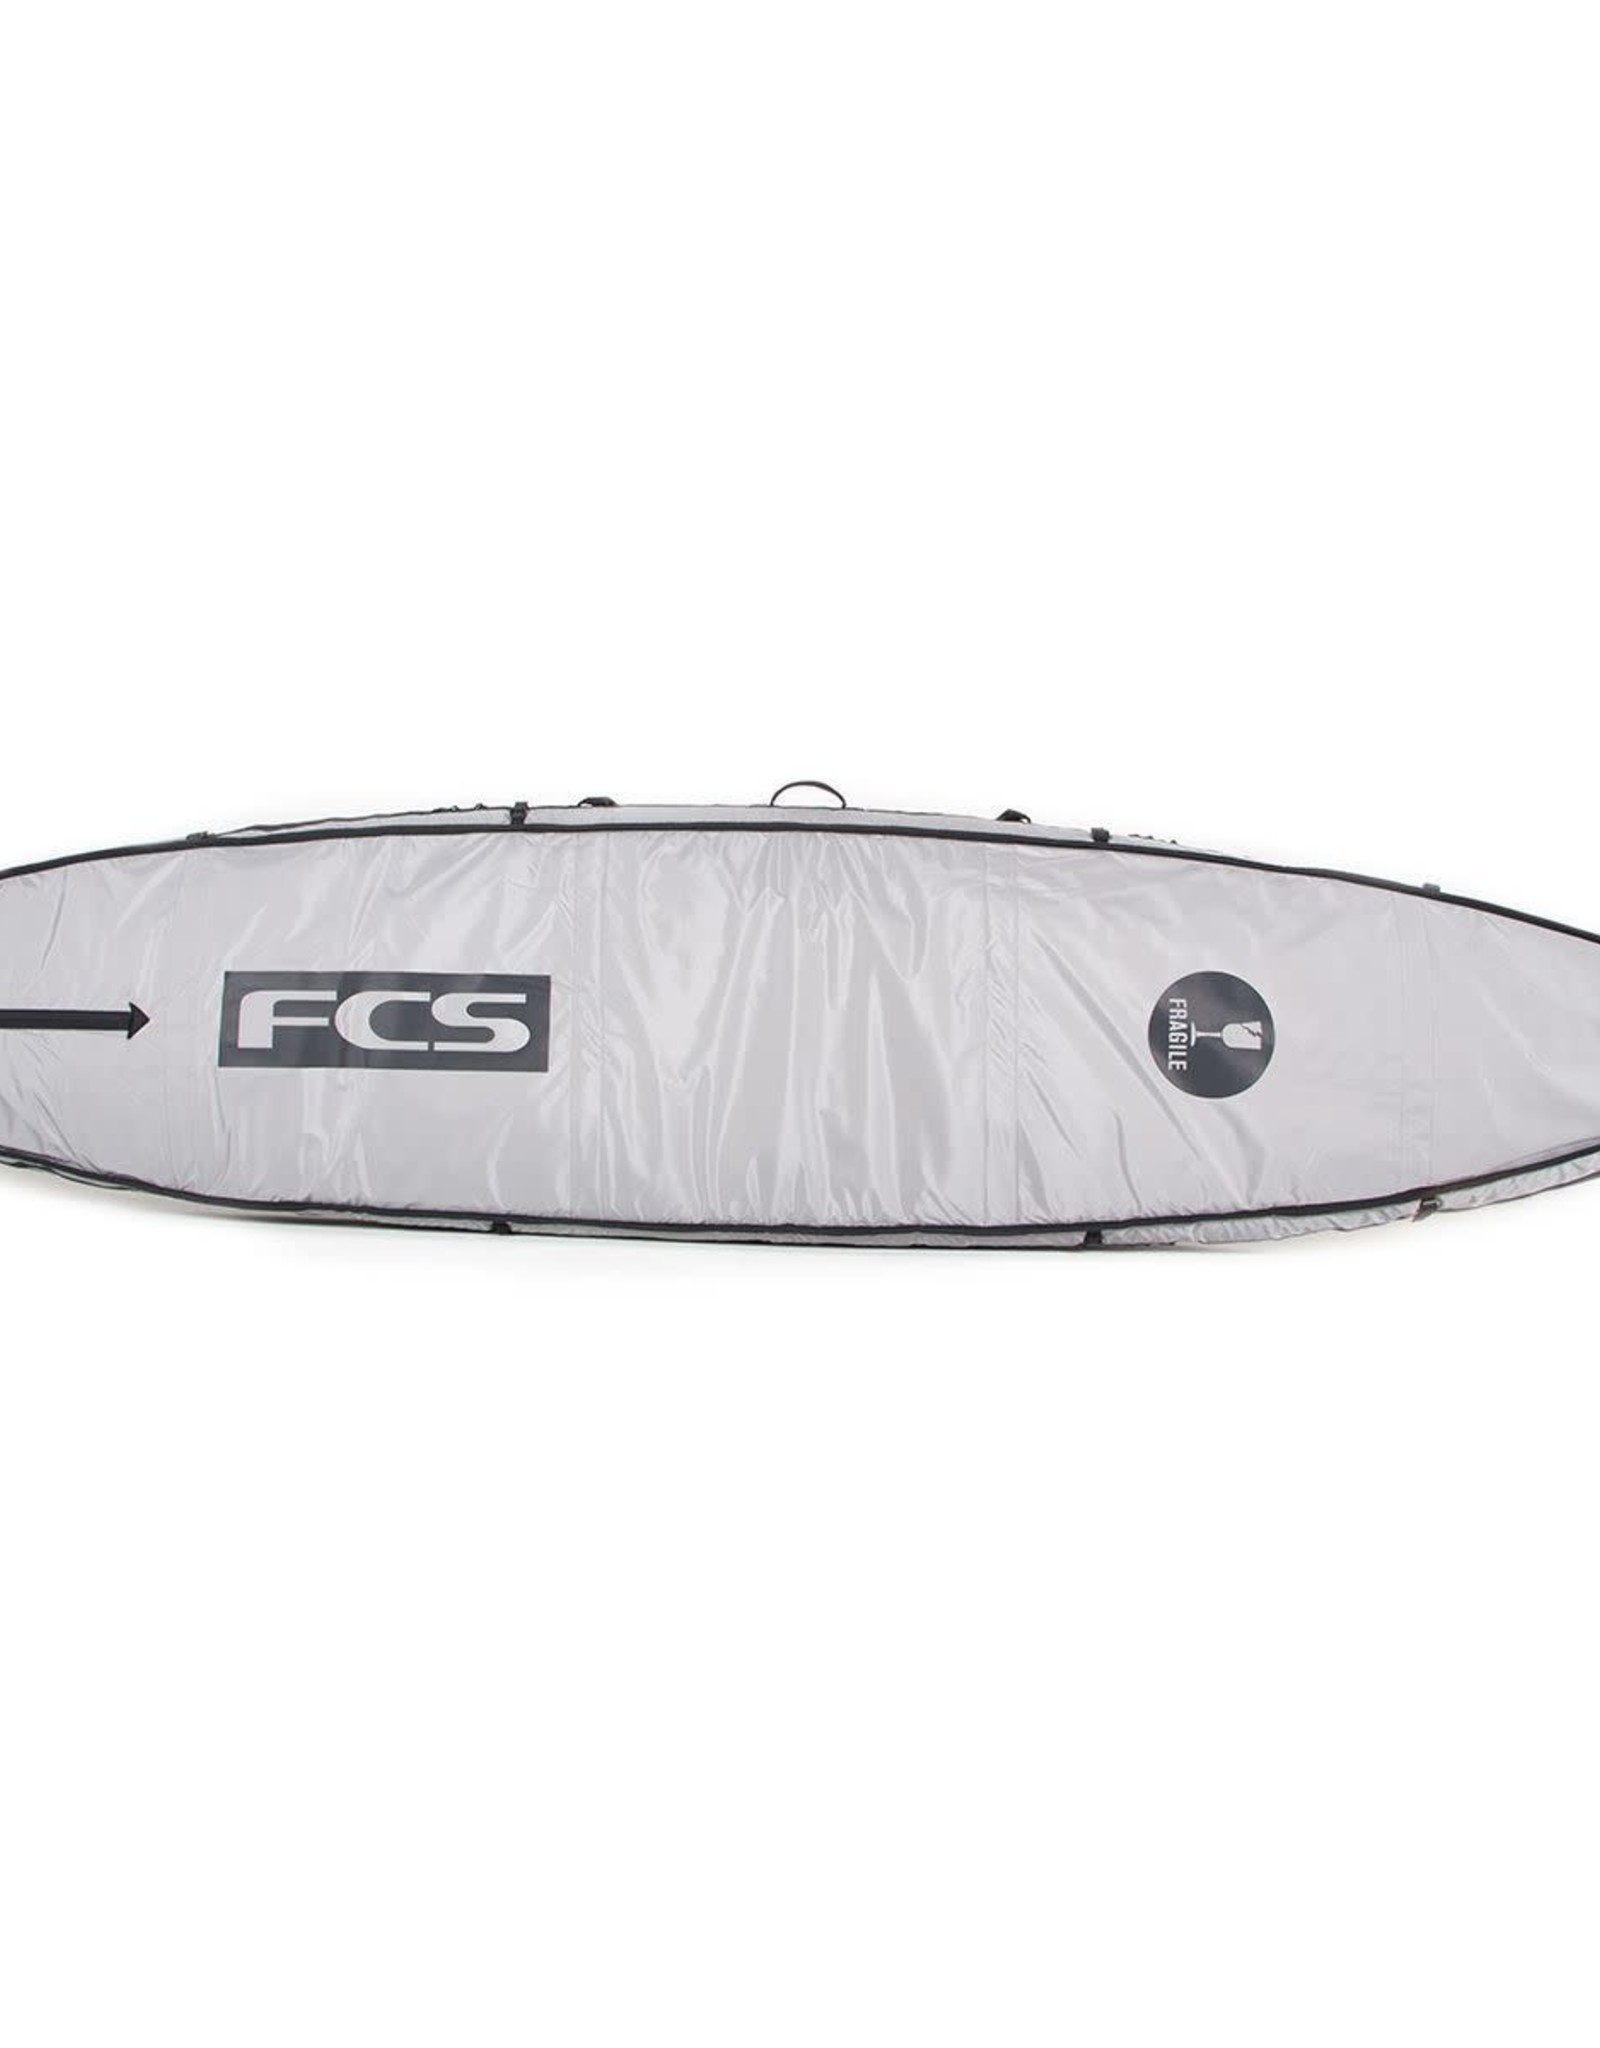 Starboard FCS 14' SUP RACING COVER